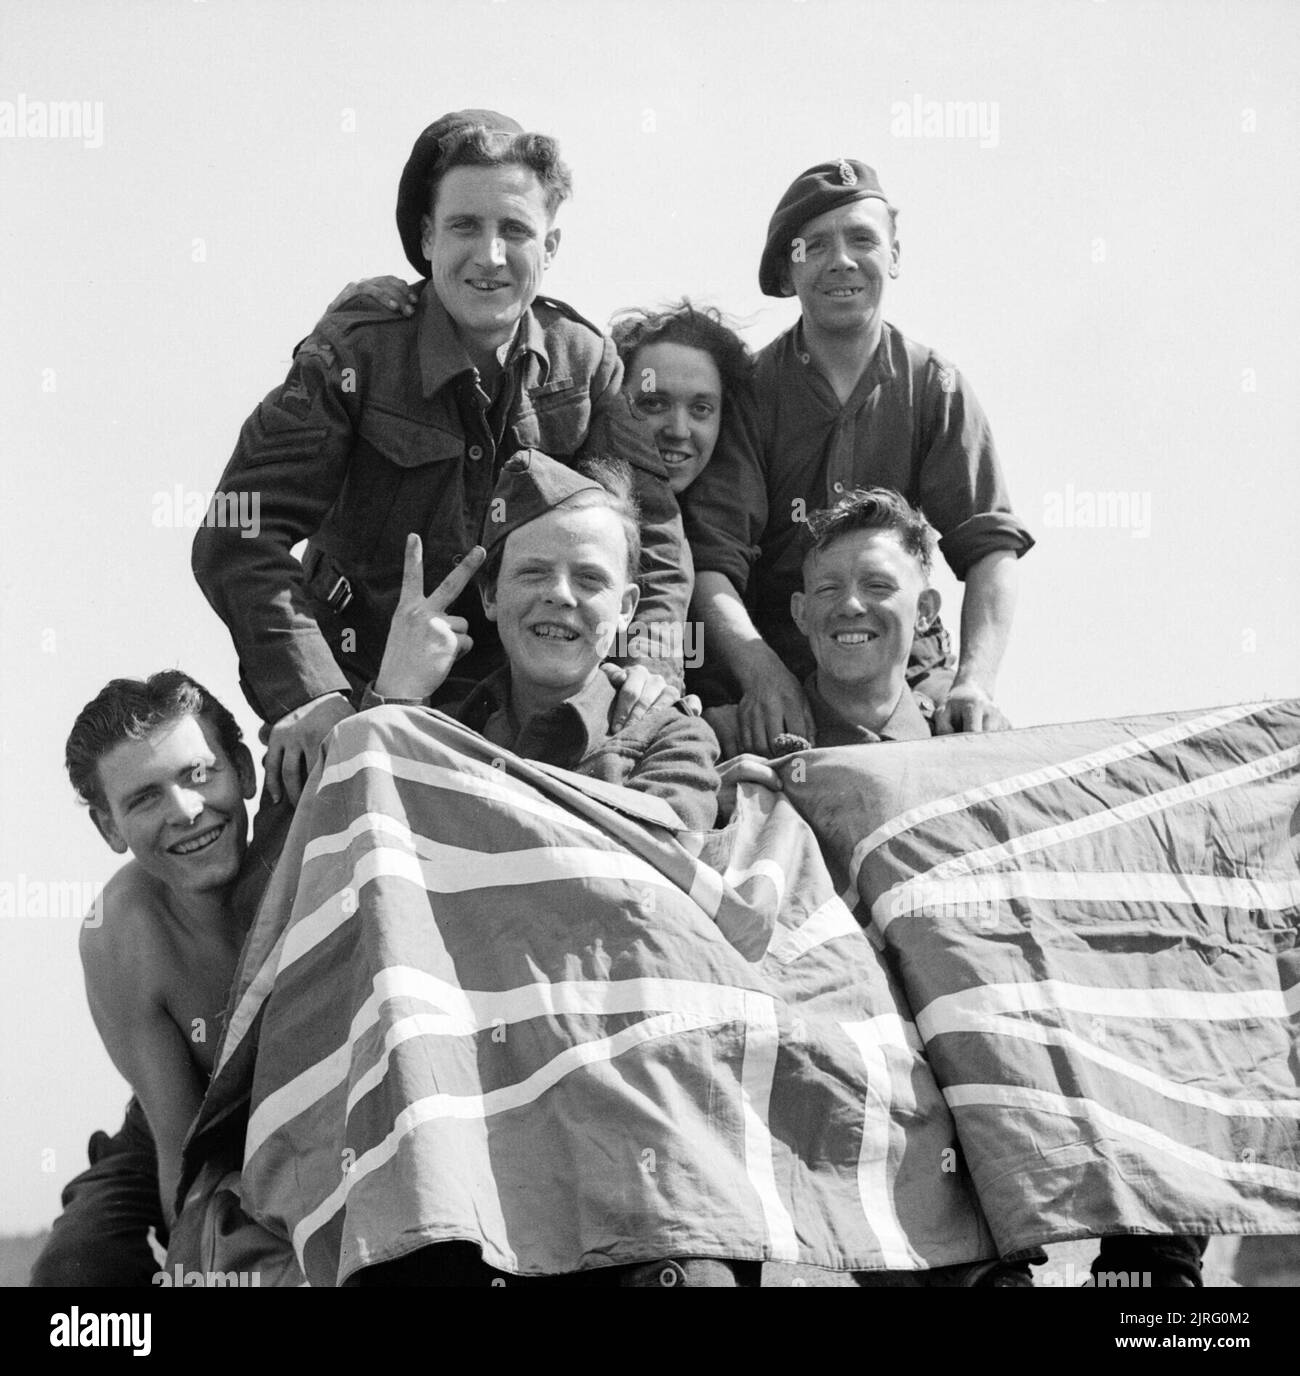 British Prisoners of War celebrate their liberation from Stalag 11B at Fallingbostel, 16 April 1945. Some of the British Prisoners of War liberated from Stalag IIB. From left to right: Private Smyth of Downham, captured at Cherbourg in 1944; Private Ryan of Bradford, captured at Hertogenbosch, 1944; Corporal Beardmore of Cheadle, captured at Arnhem, 1944; Private Still of Manchester, captured at Arnhem, 1944 and Private Greare of Glasgow, captured at St. Valery, 1940. Stock Photo